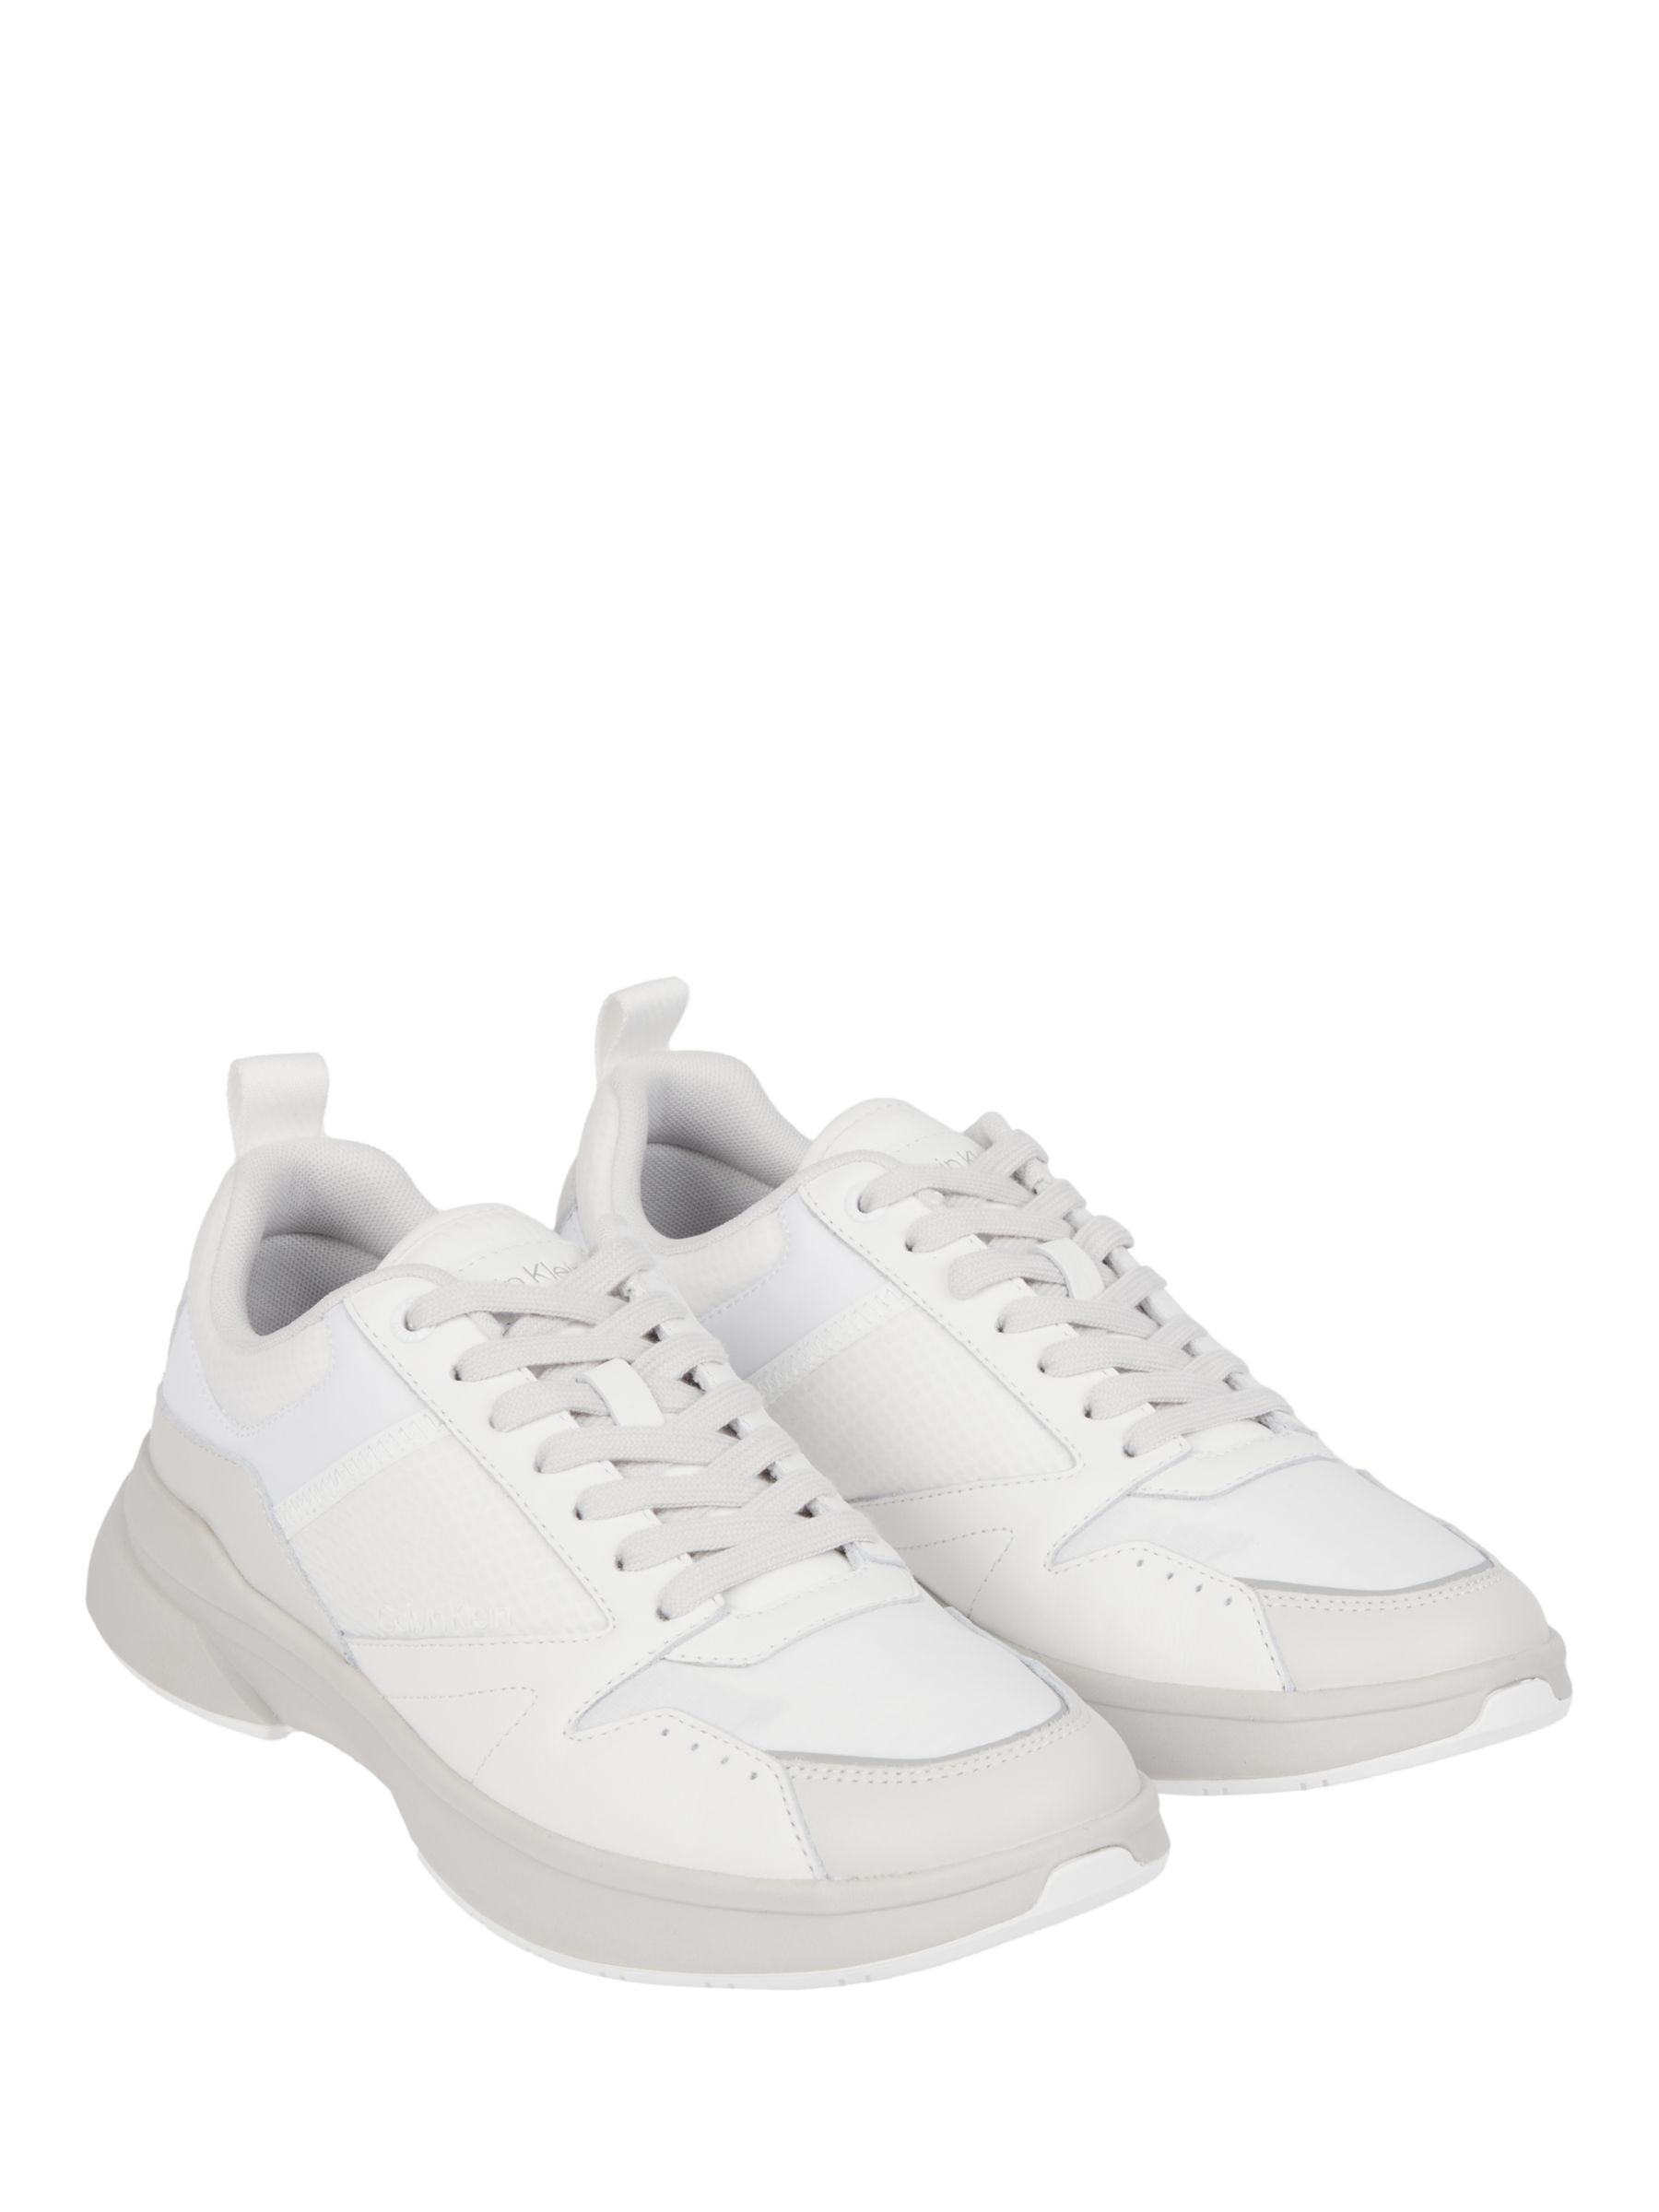 Calvin Klein Leather Low Top Chunky Heel Trainers, White/Light Grey, 9